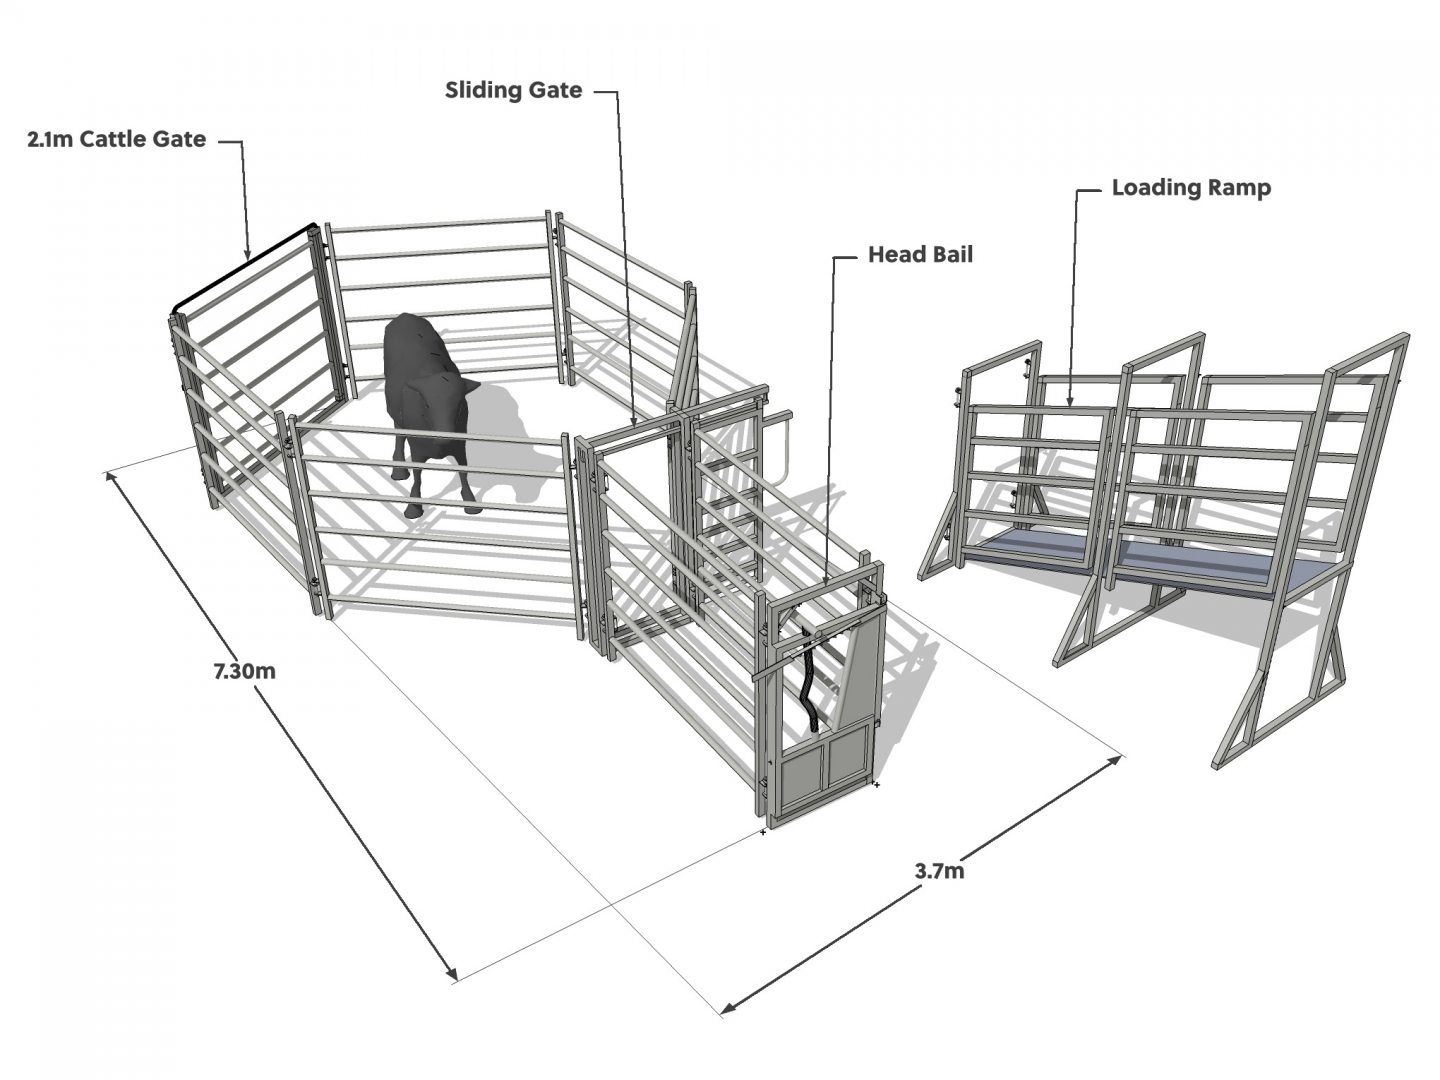 10 Head Cattle Yard with Head Bail and Loading Ramp